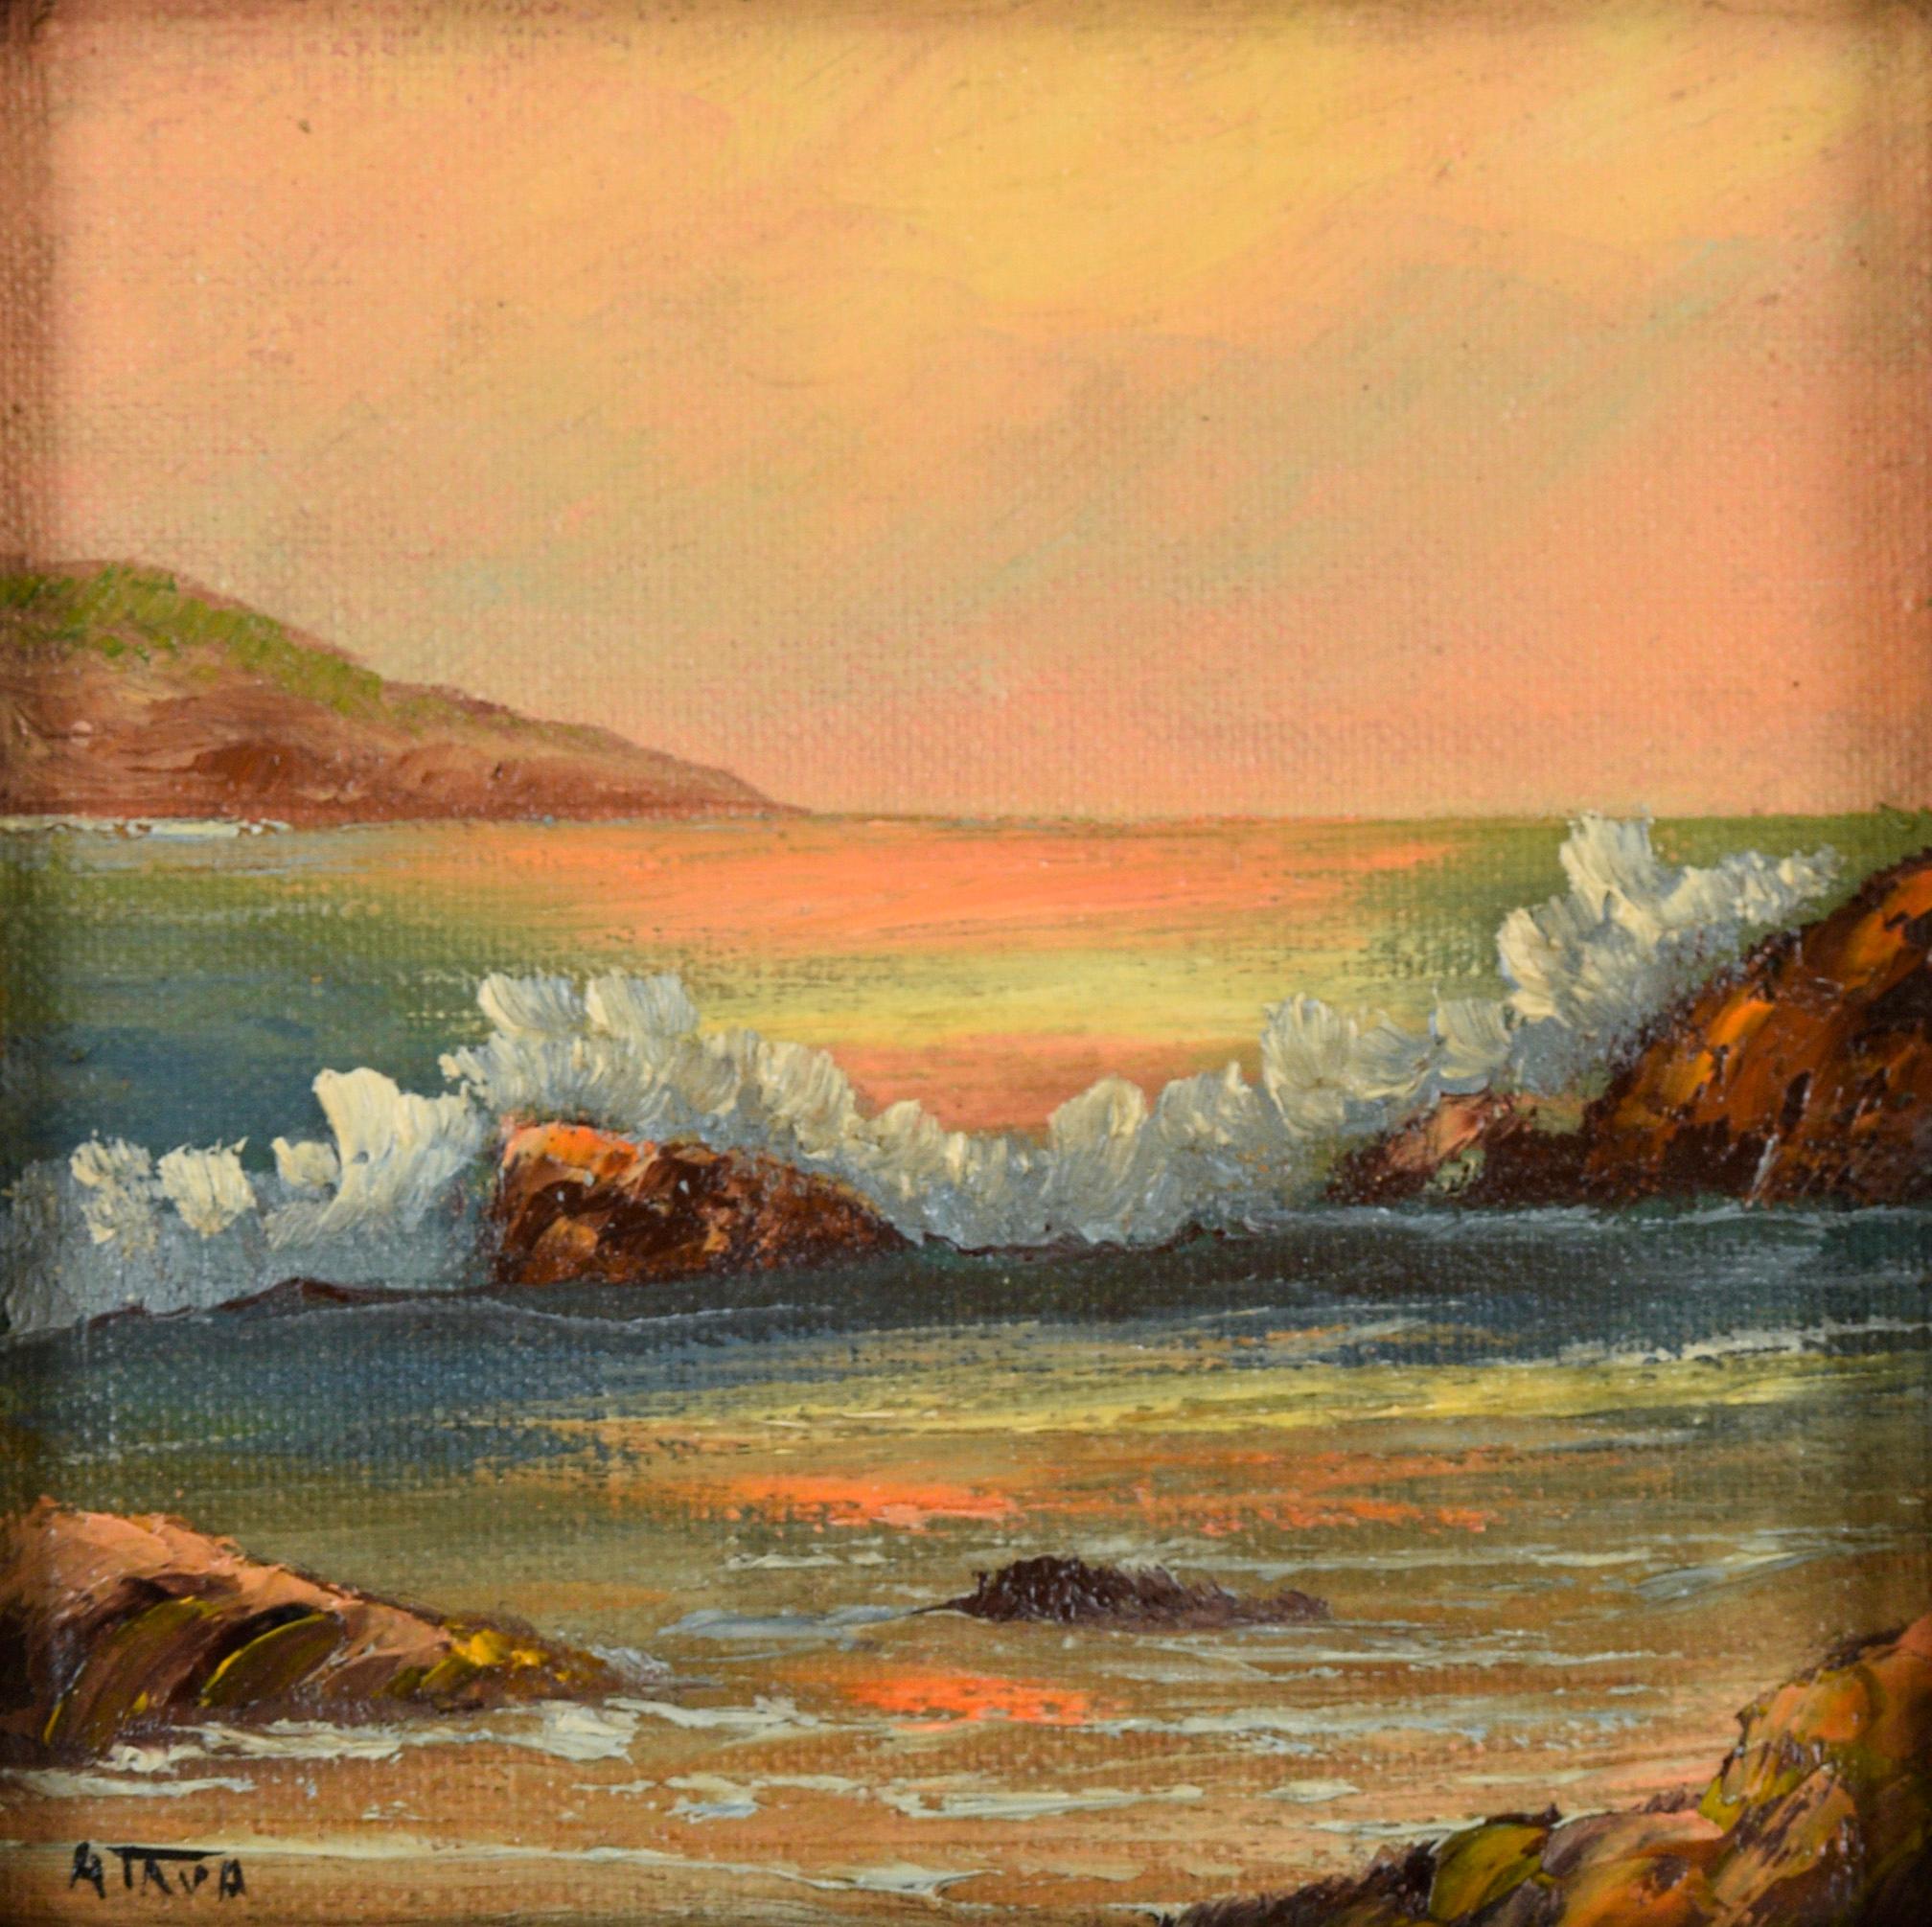 Sunset Seascape - Small Plein Air Oil Painting on Canvas

Bright orange seascape by California artist 